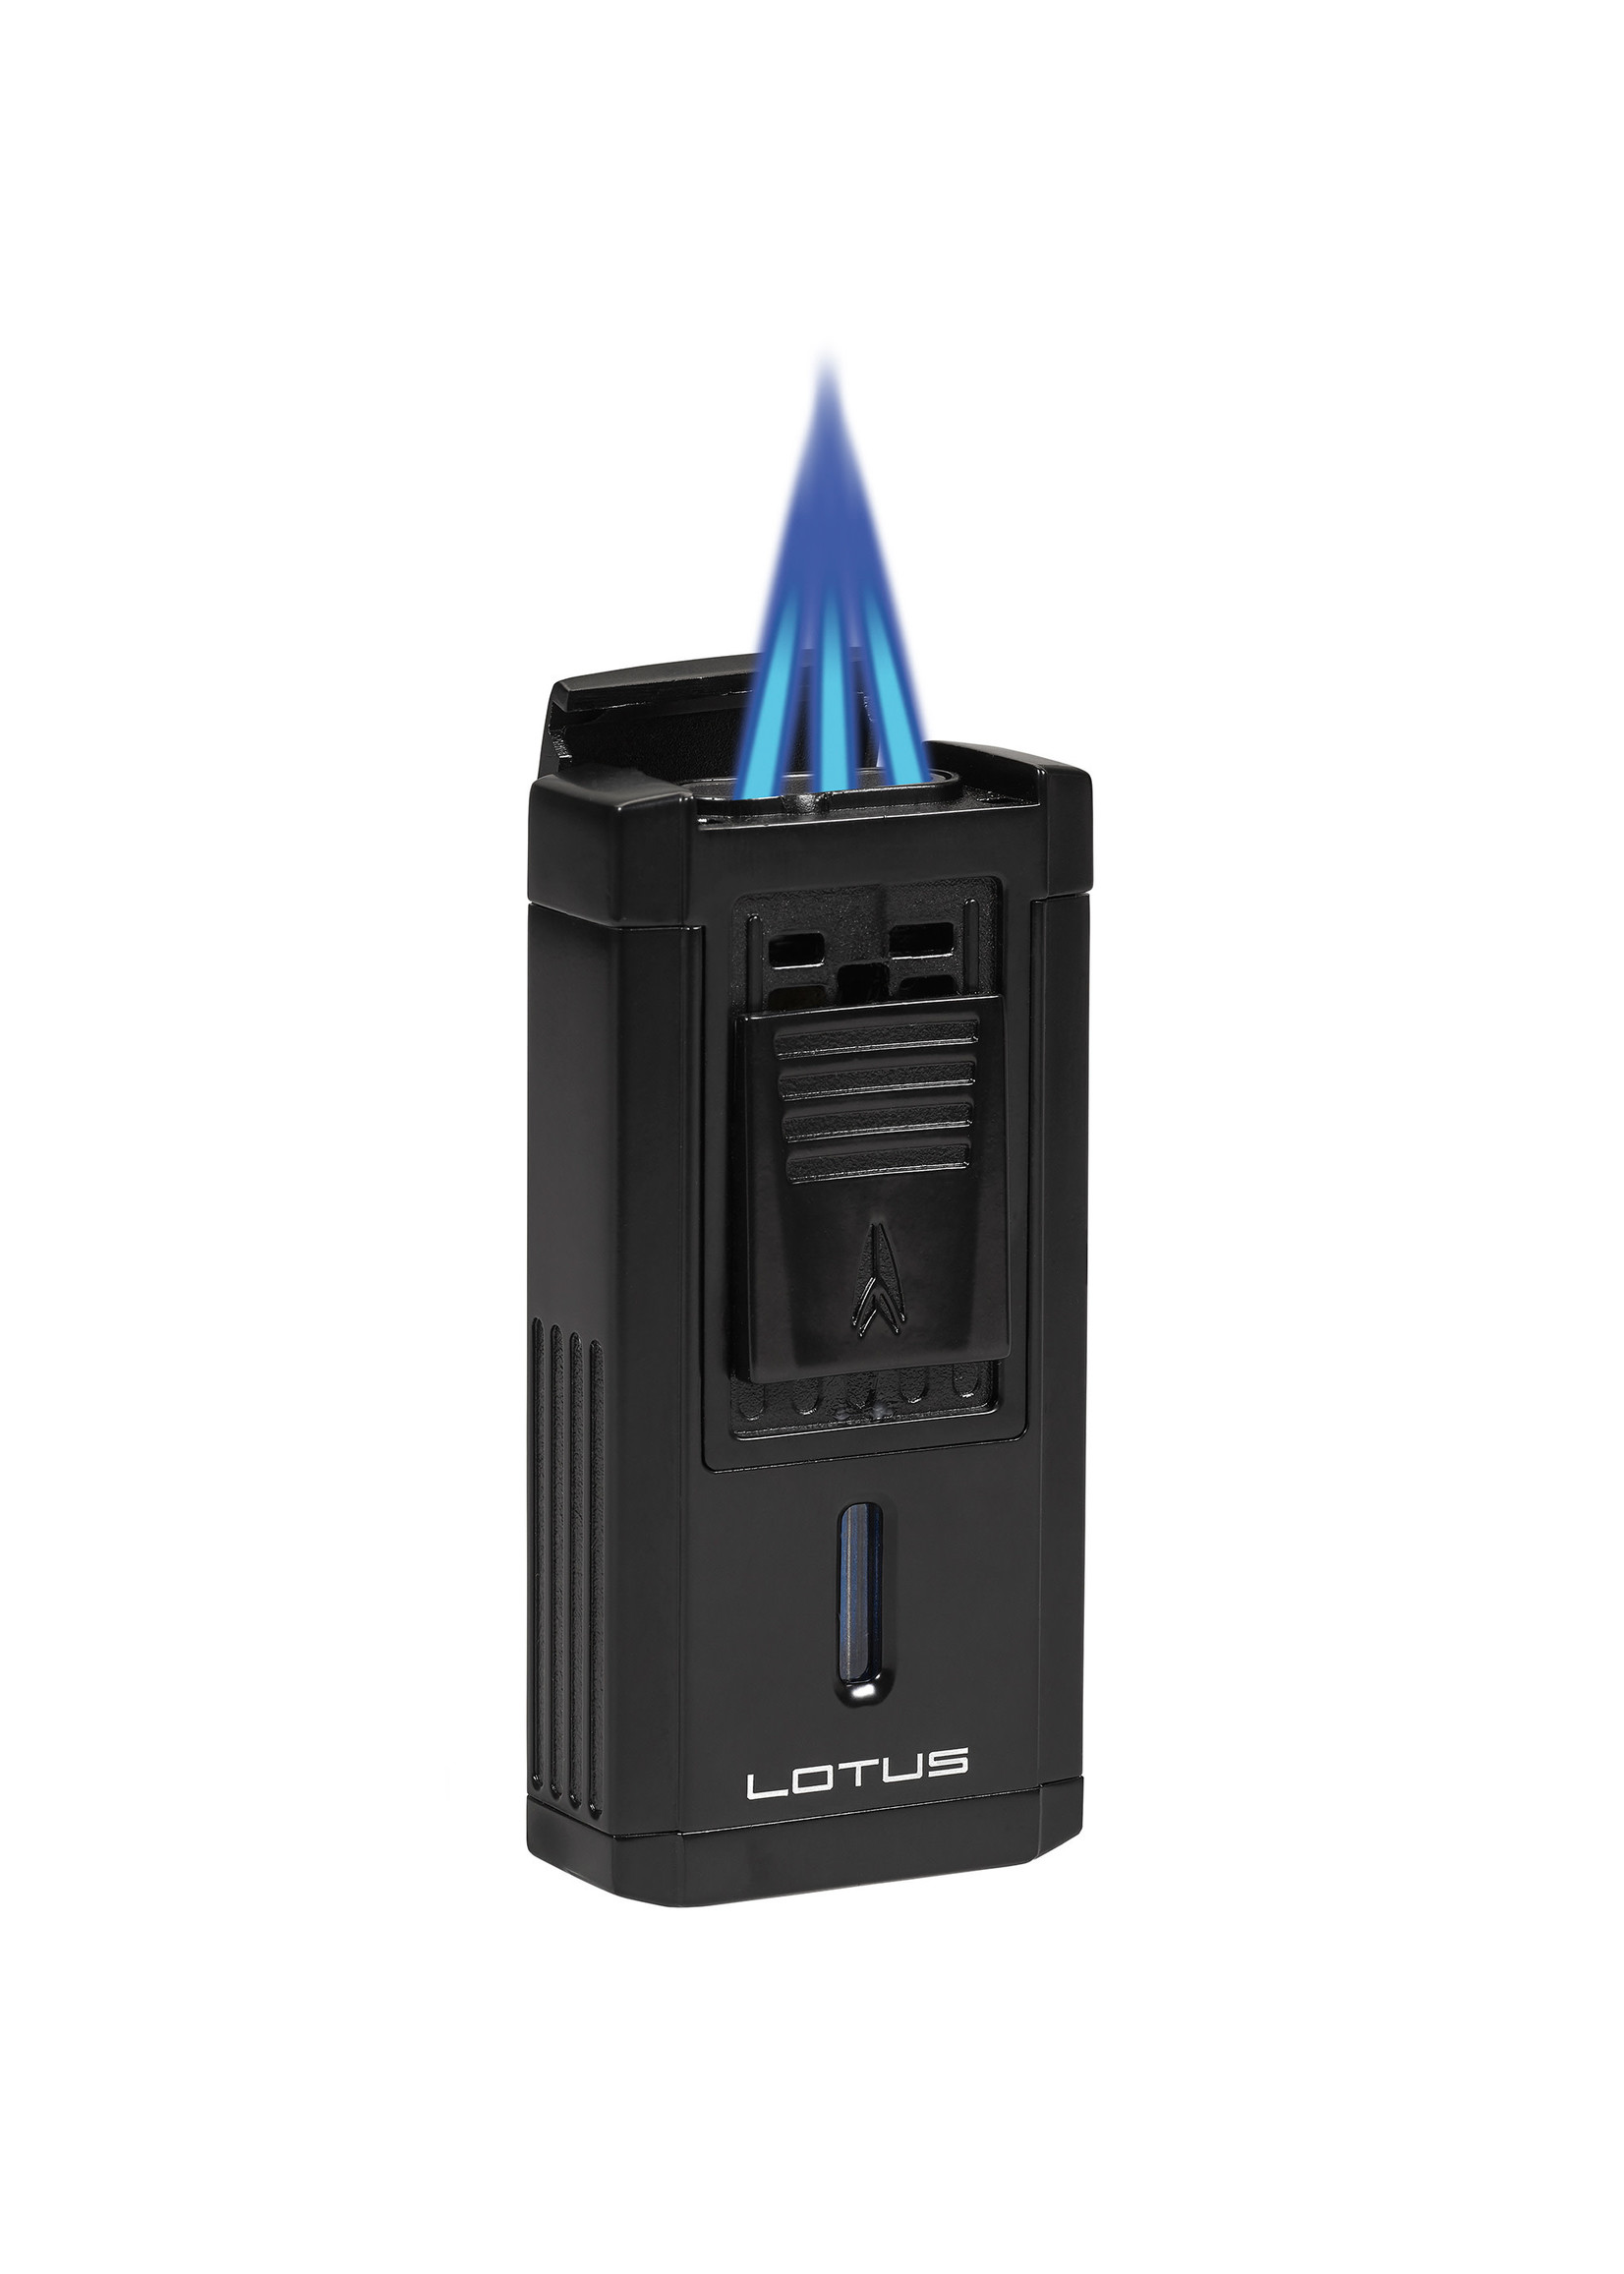 Lotus DUKE - Lotus Triple Pinpoint Flame Lighter with Cutter